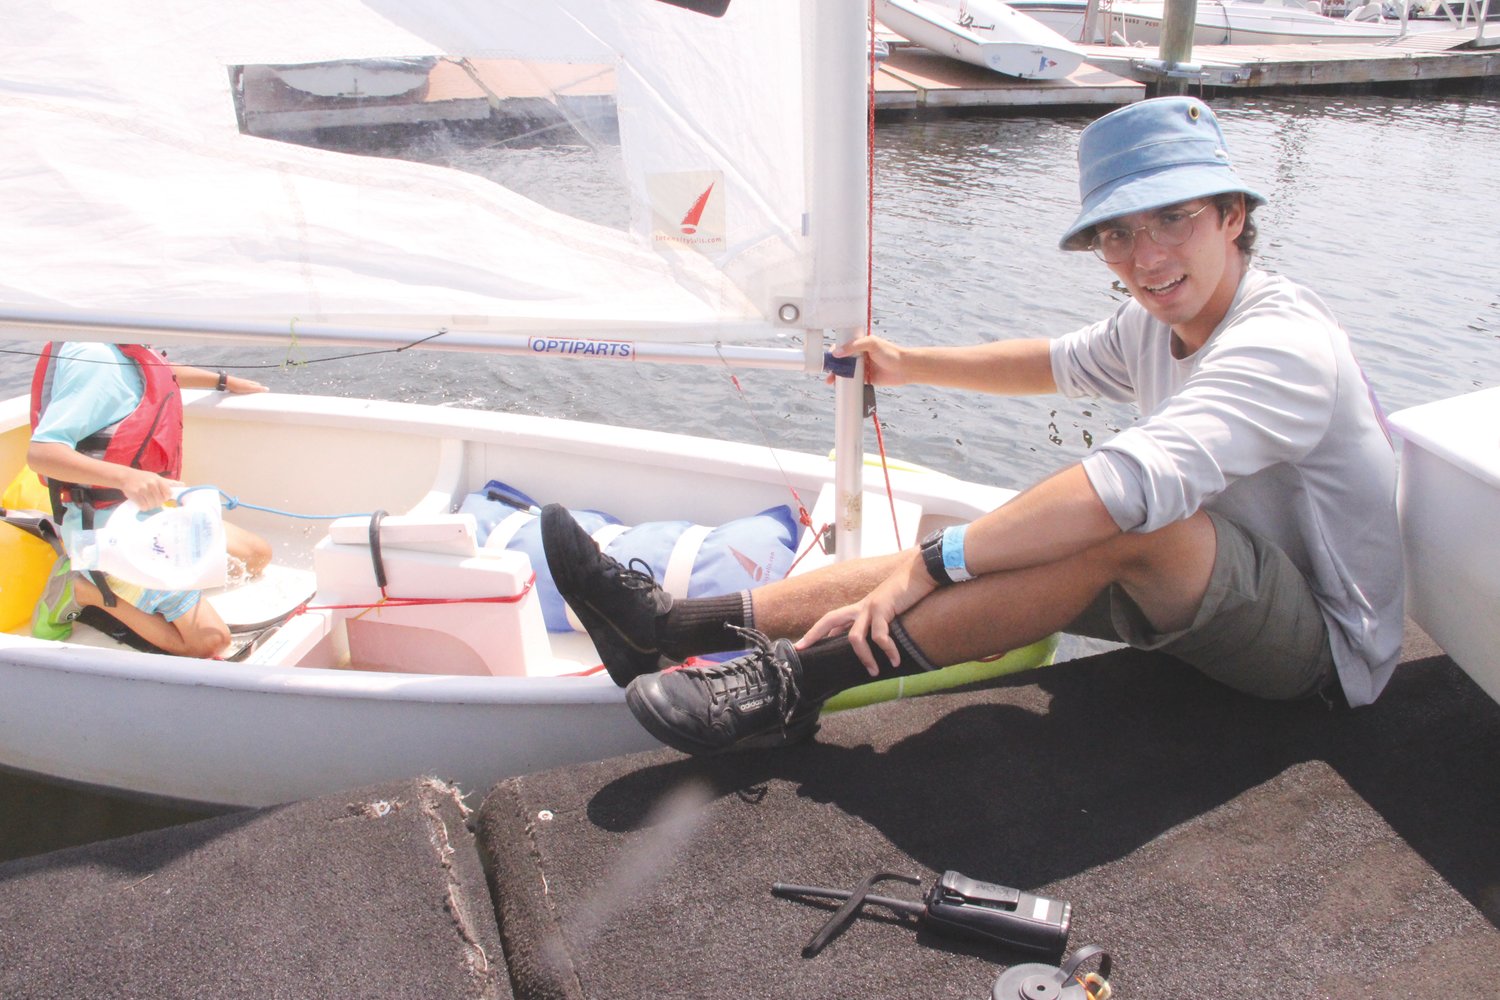 BACK TO TEACH: Eli Reville, a student at Columbia University, who sailed with the Edgewood Yacht Club is now teaching sailing at the club.